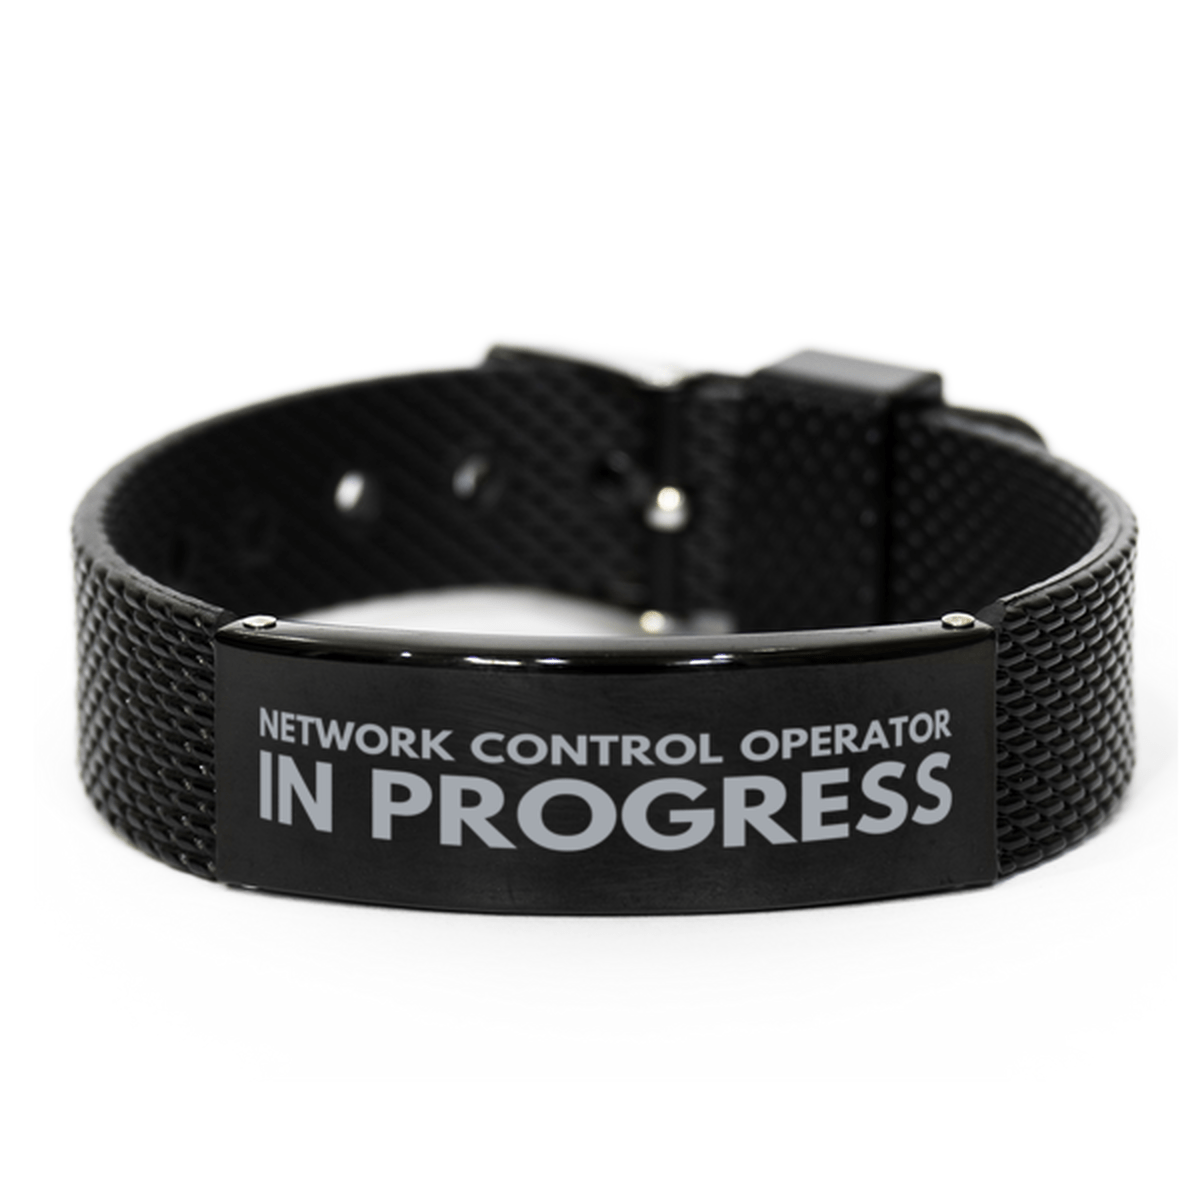 Inspirational Network Control Operator Black Shark Mesh Bracelet, Network Control Operator In Progress, Best Graduation Gifts for Students